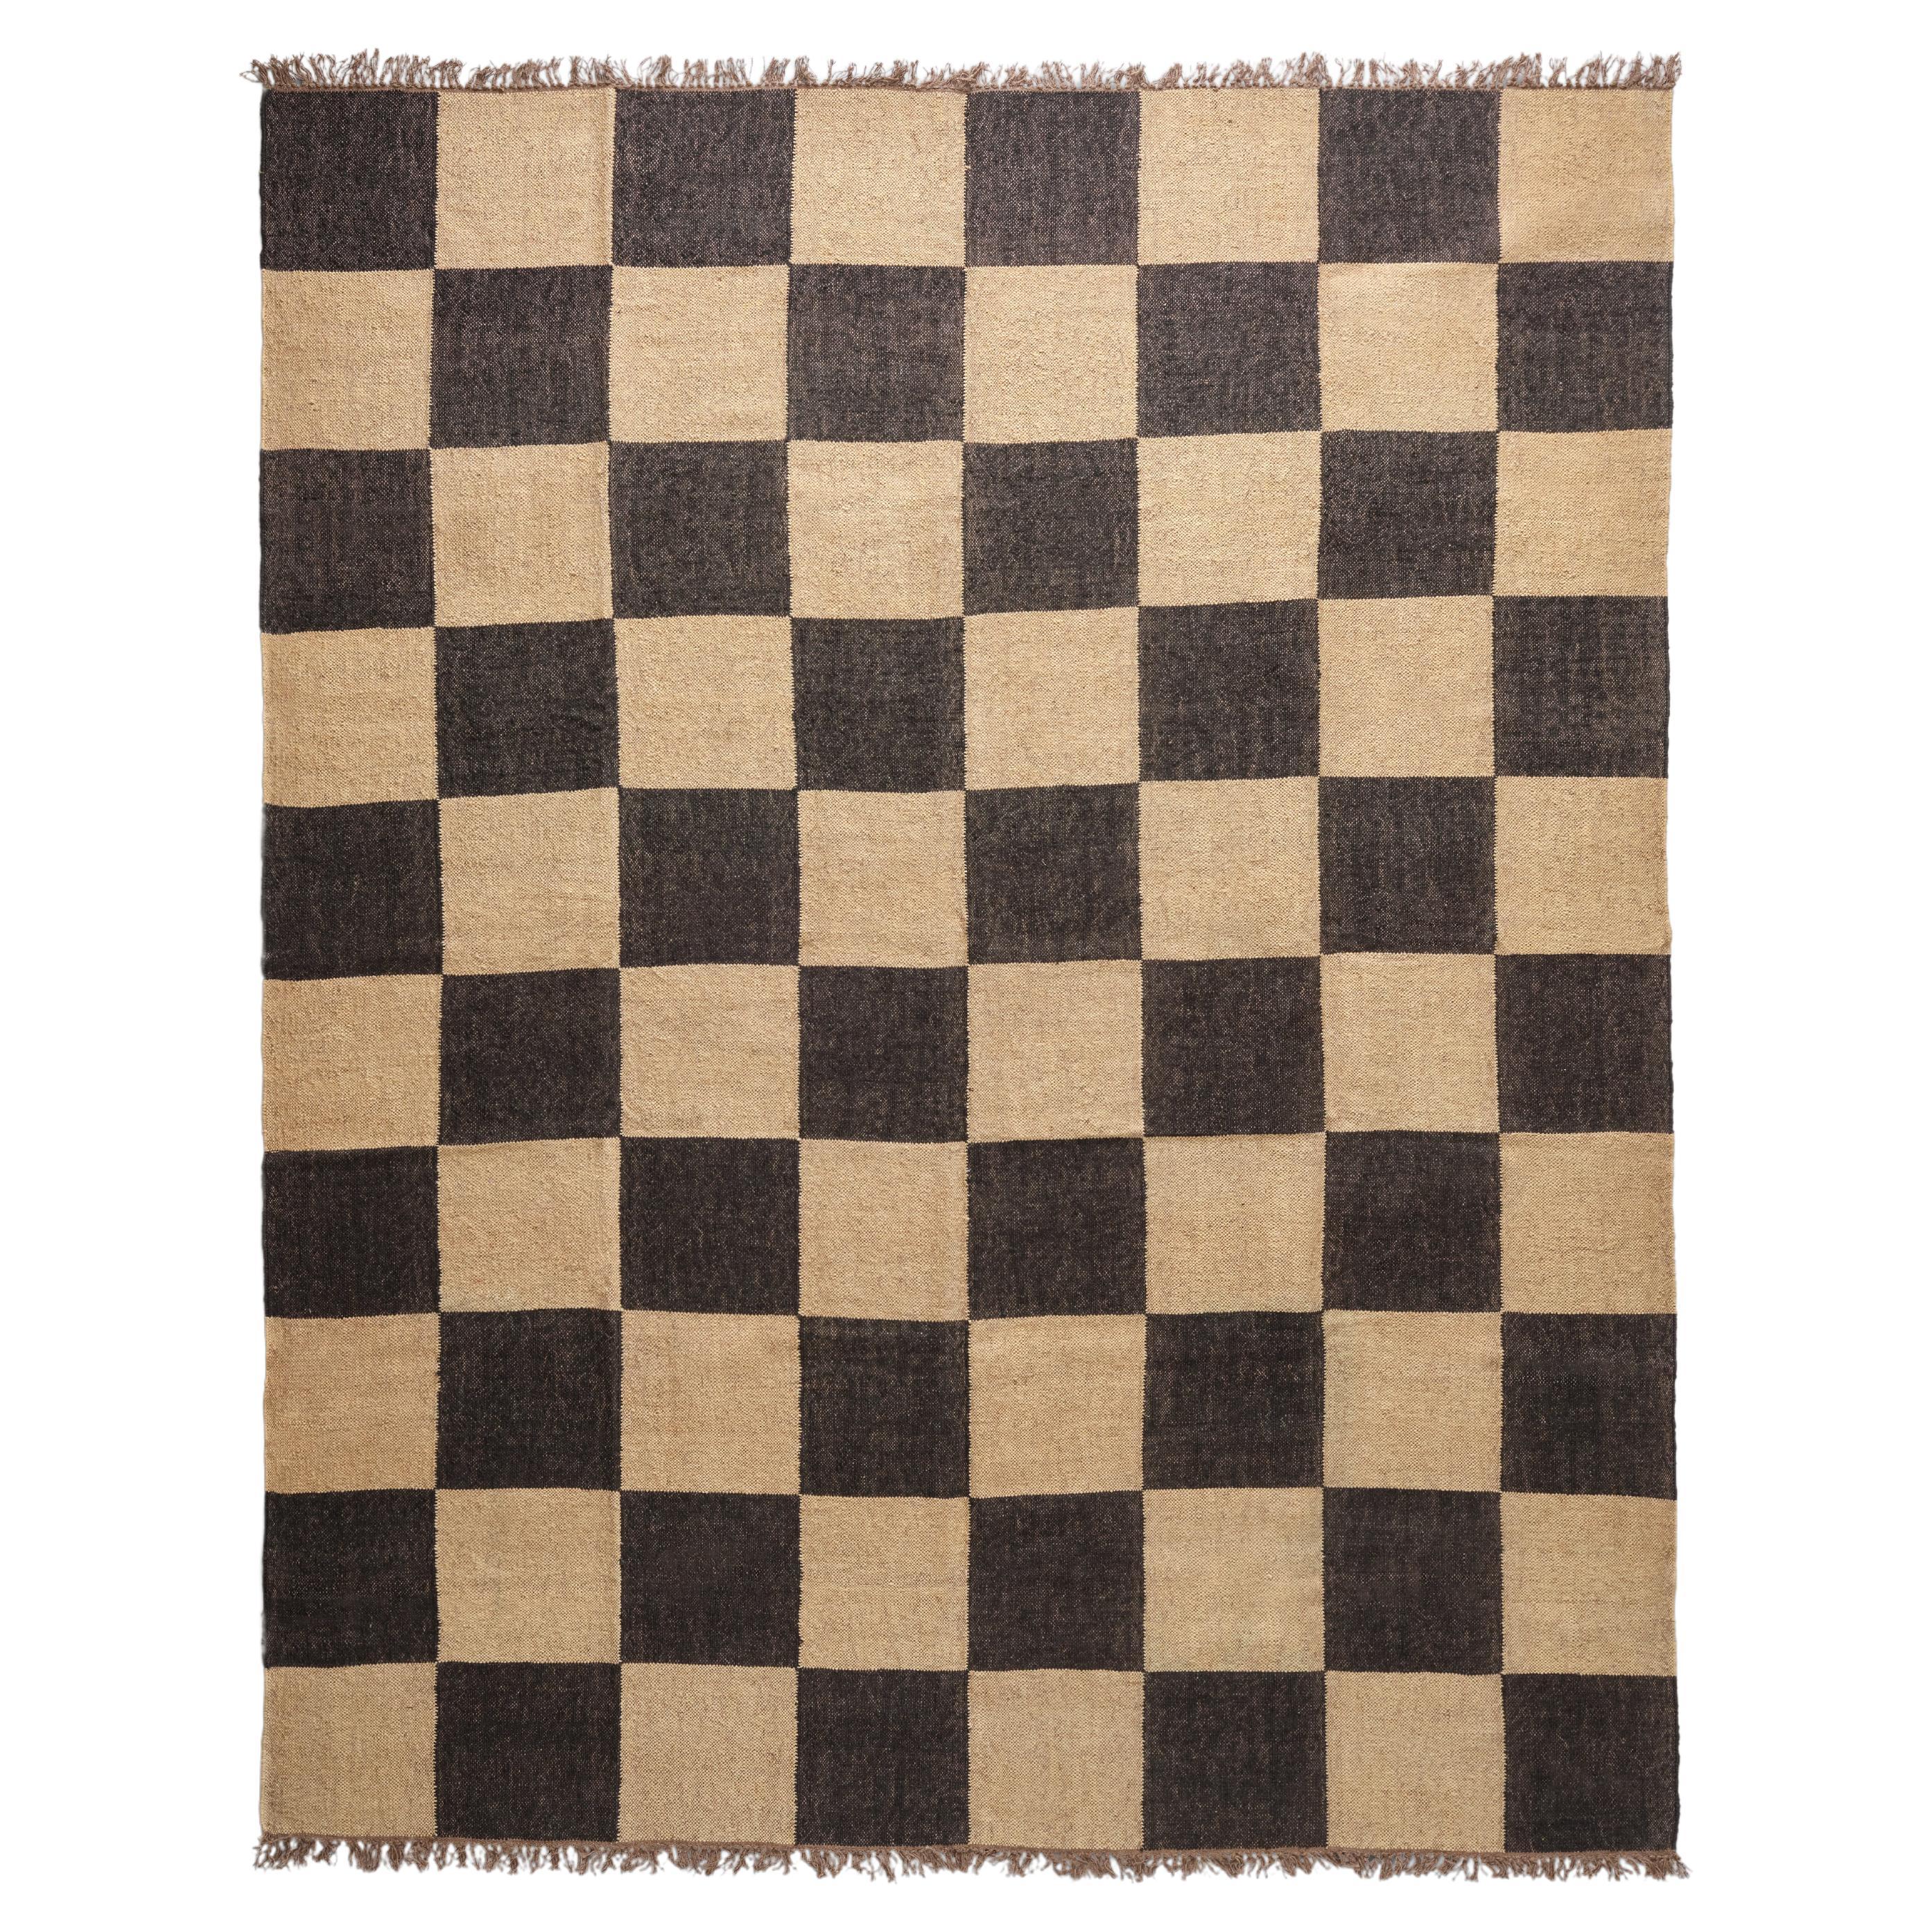 The Forsyth Checkerboard Rug - Big Checks in Off Black, 11x14 For Sale